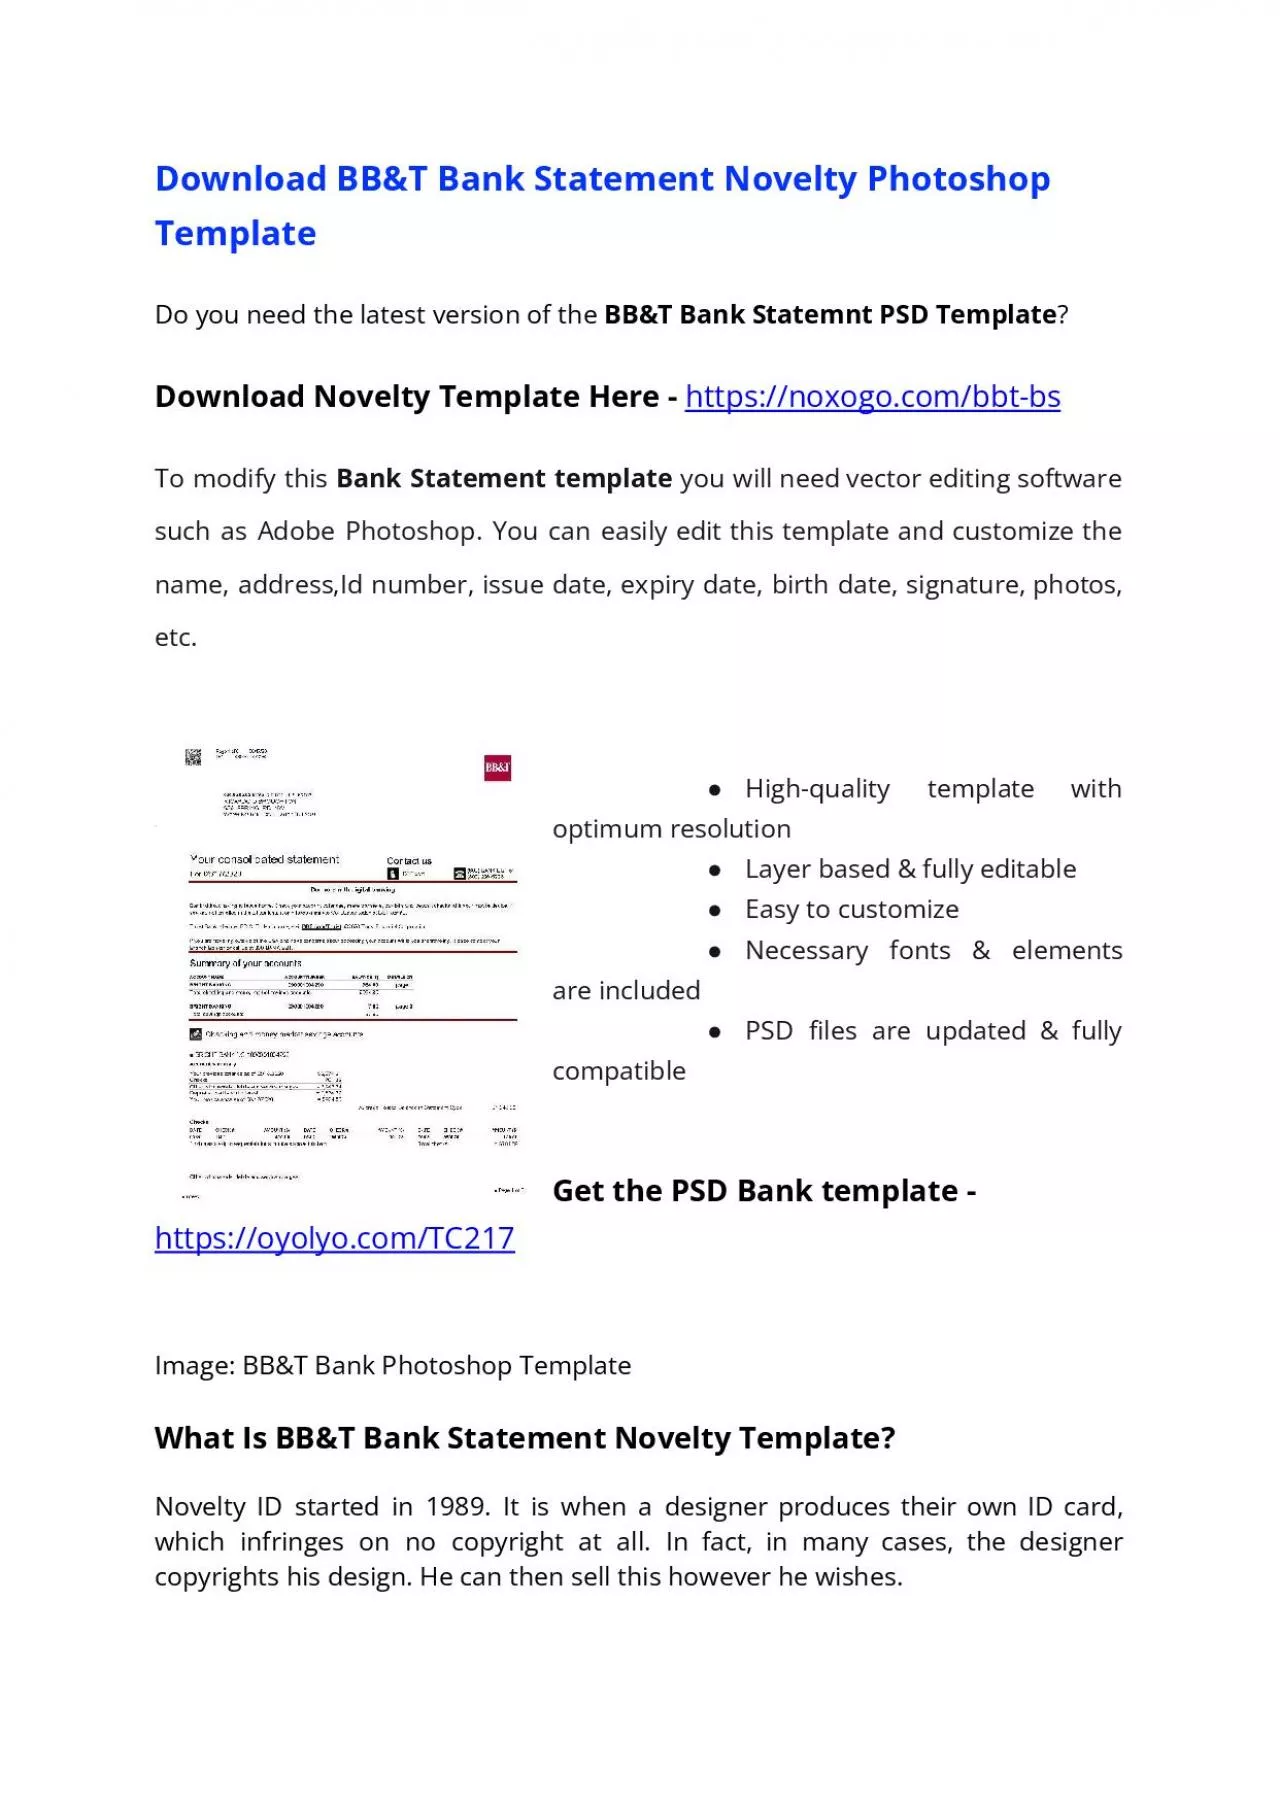 BB&T Bank Statement Template – Download MS Word File